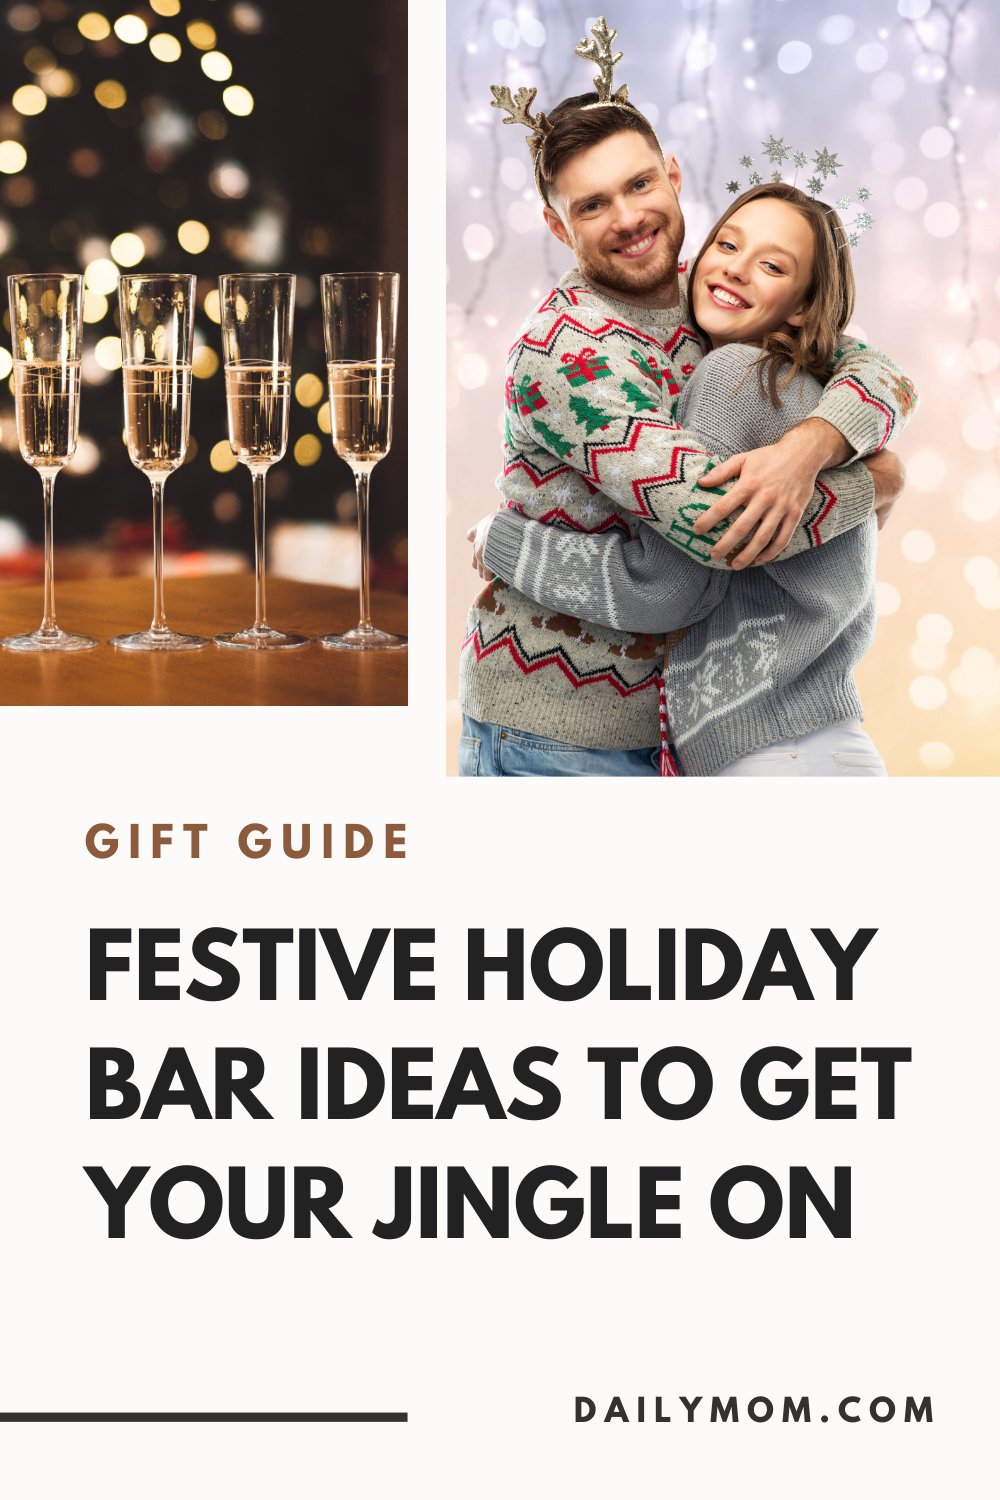 31 Festive Holiday Bar Ideas To Get Your Jingle On 42 Daily Mom, Magazine For Families